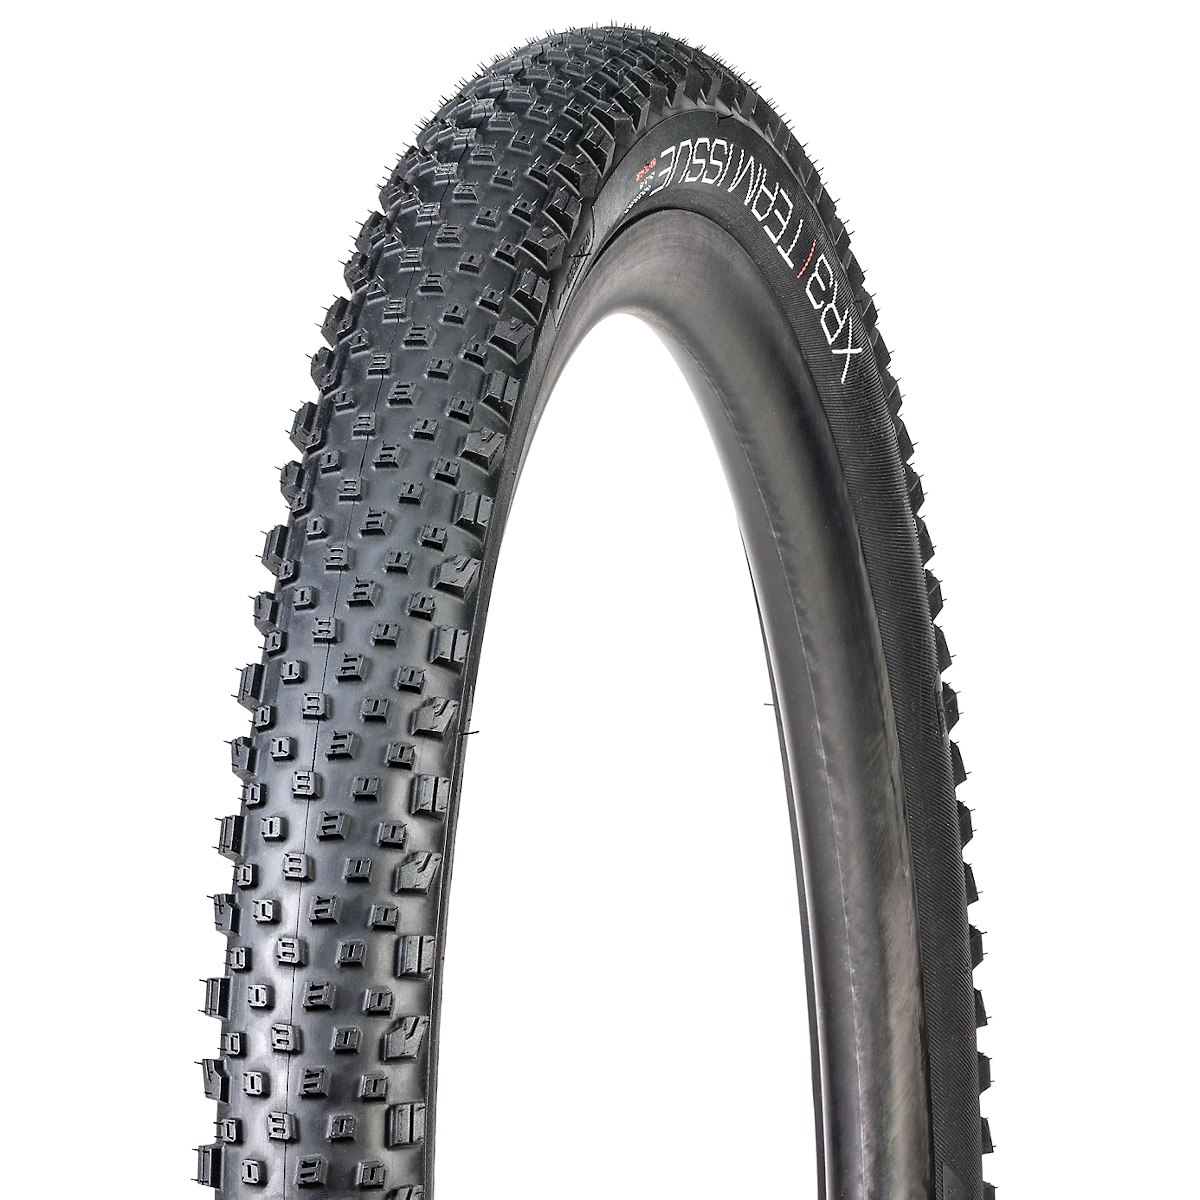 Image of Bontrager XR3 Team Issue TLR MTB Folding Tire 27.5x2.8 Inches